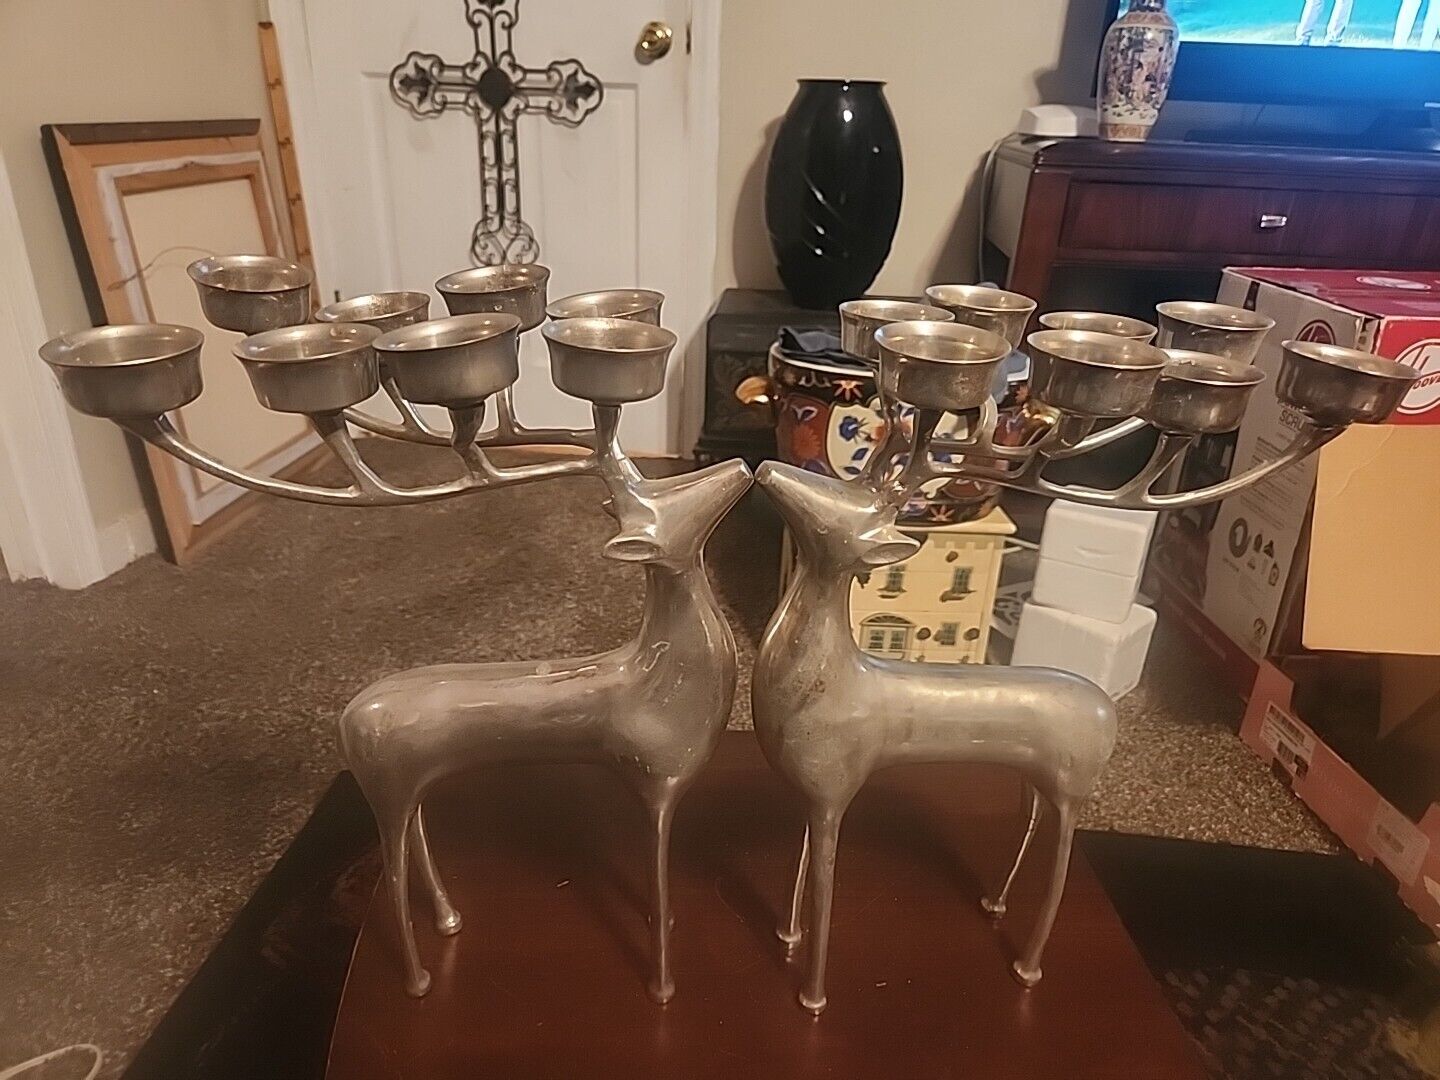 PAIR OF POTTERY BARN REINDEER CANDELABRAS SILVERPLATED 8 POINT